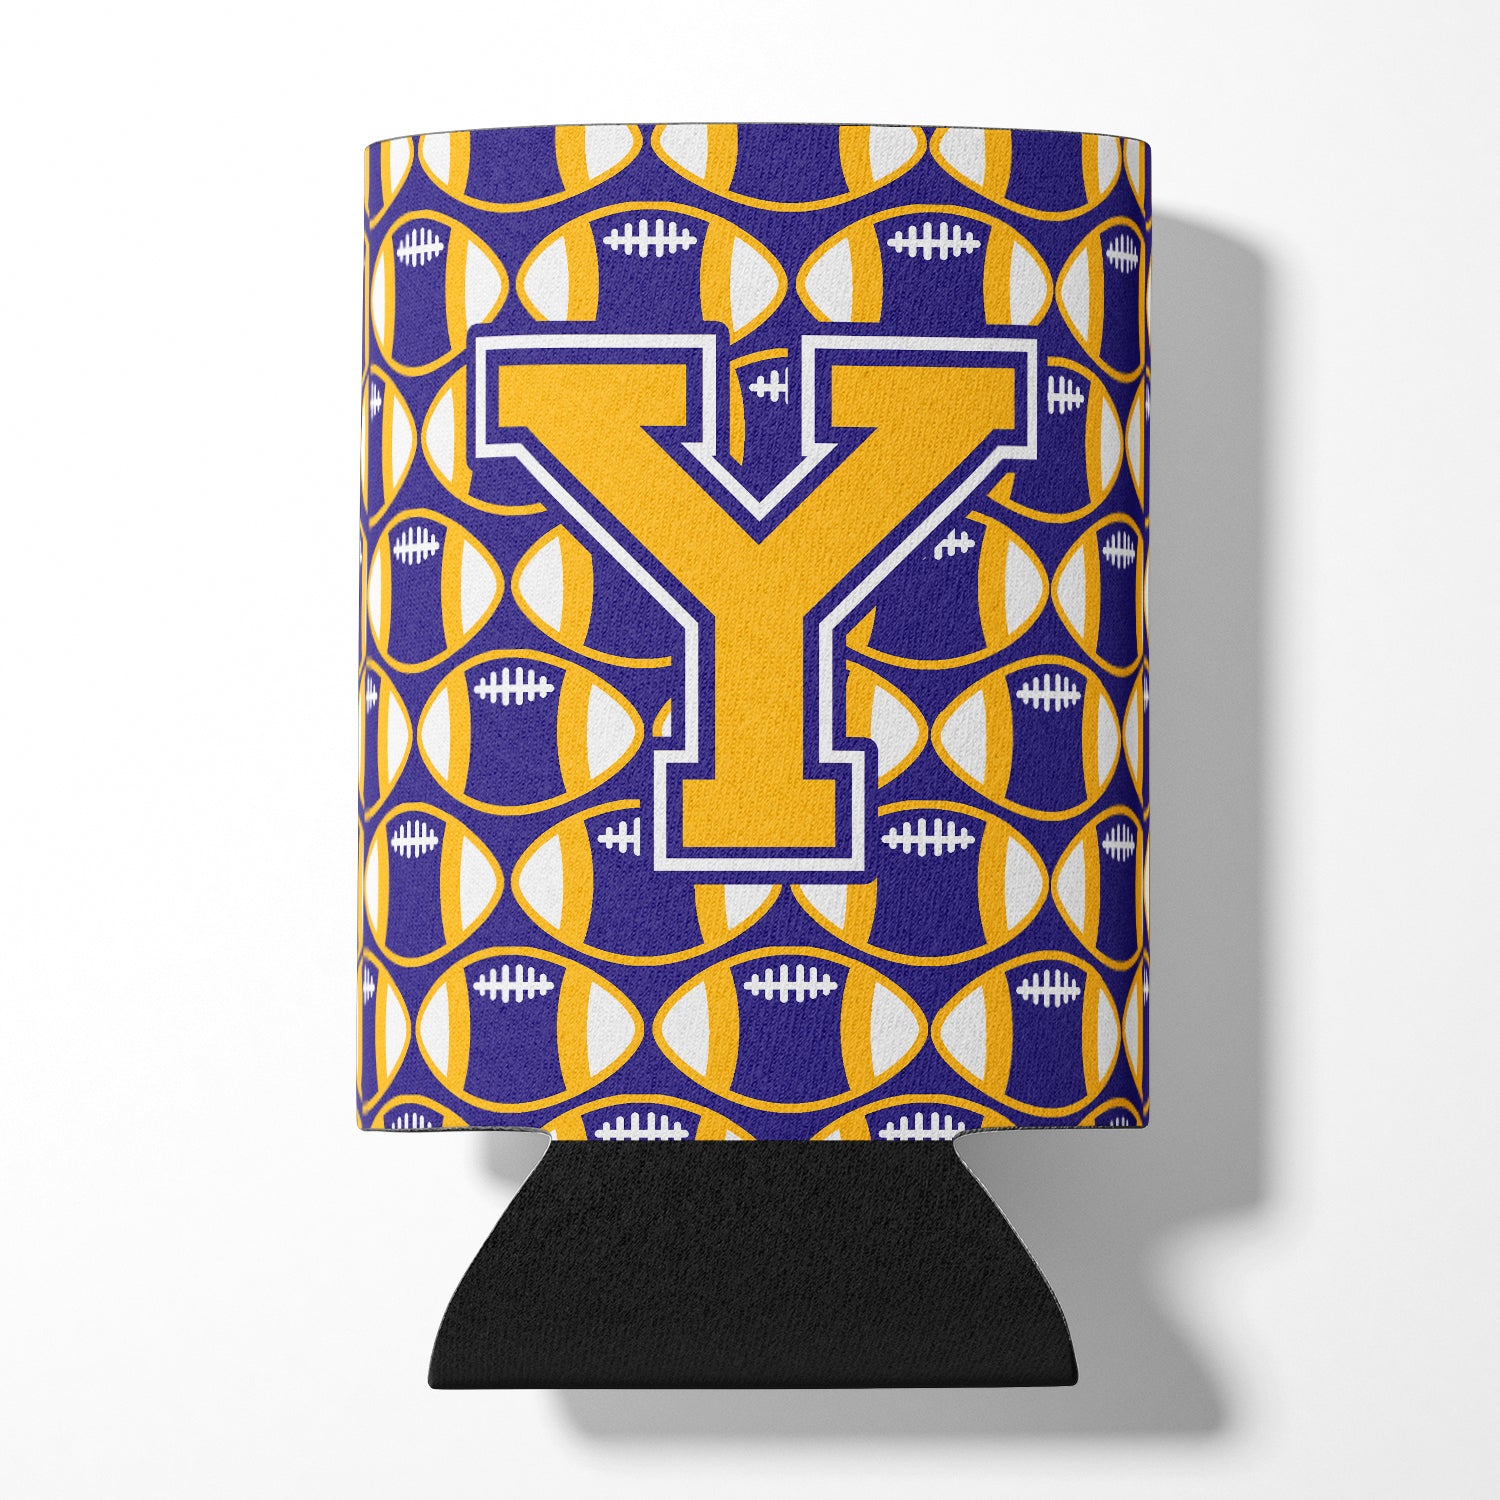 Letter Y Football Purple and Gold Can or Bottle Hugger CJ1064-YCC.